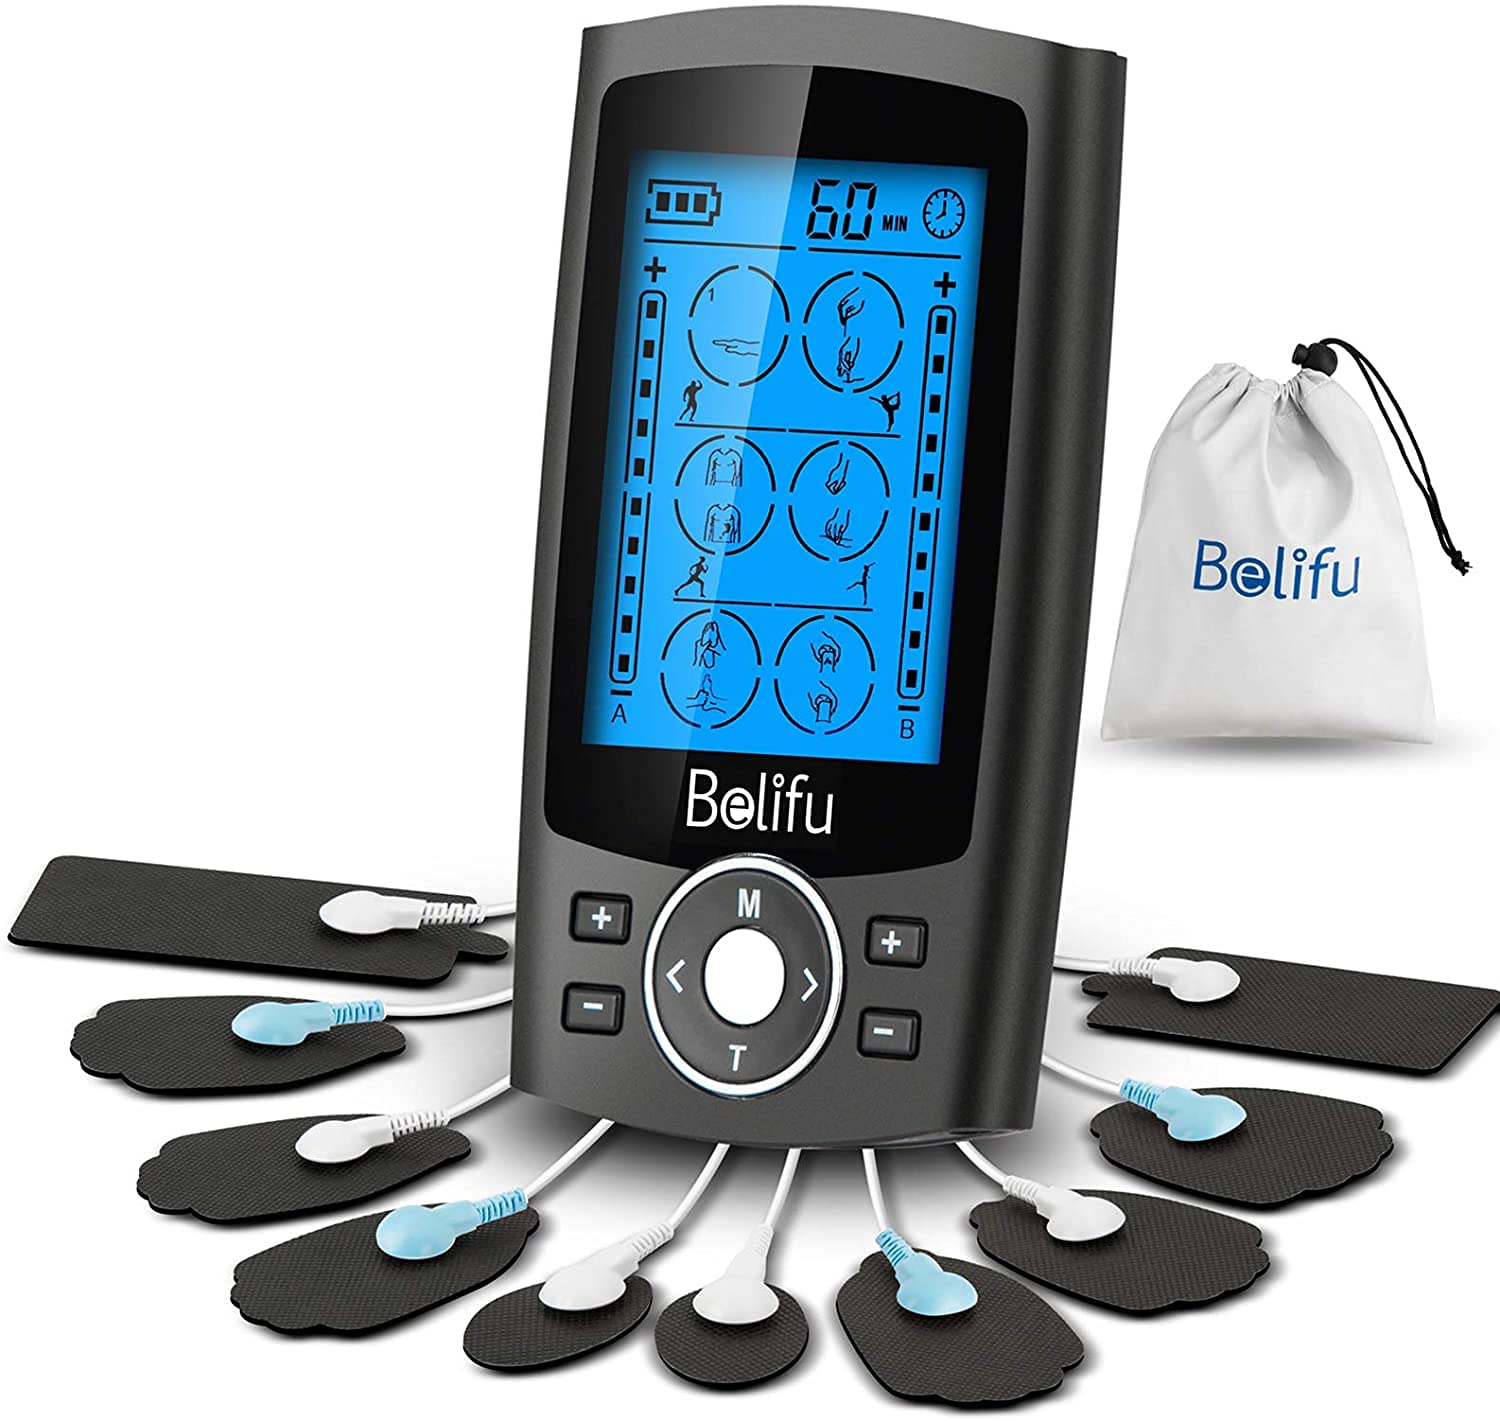 Easy@Home Electronic TENS Unit: Pain Relief Therapy - EMS Pulse Massager  Rechargeable Machine - Dual Channel 24 Modes 20 Intensities 16 Pads TENS  and